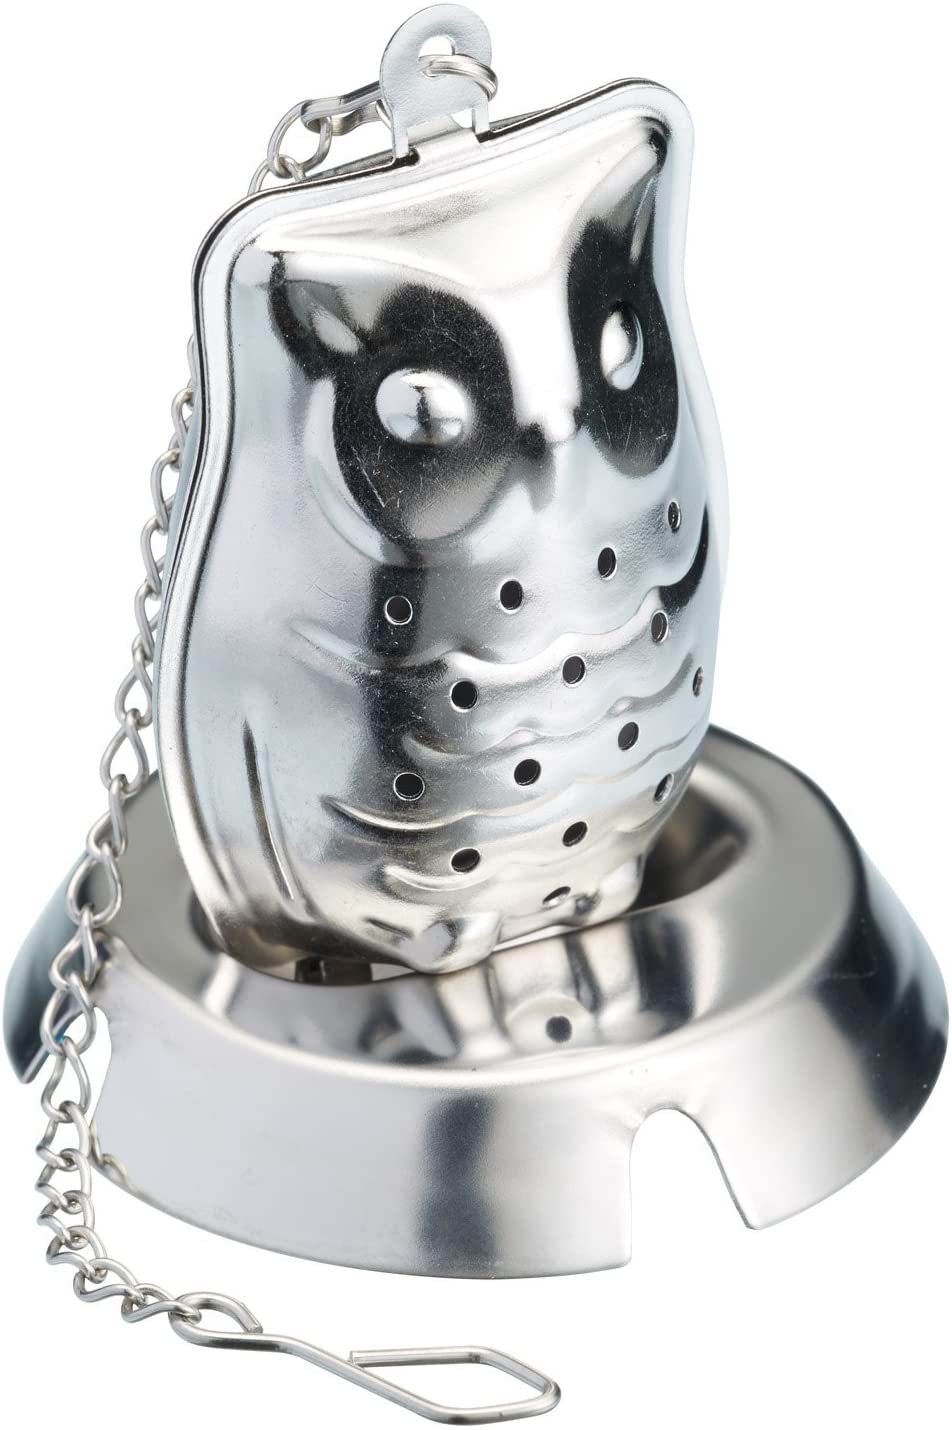 KitchenCraft Le Xpress New For Stainless Steel Owl Tea Infuser, Silver